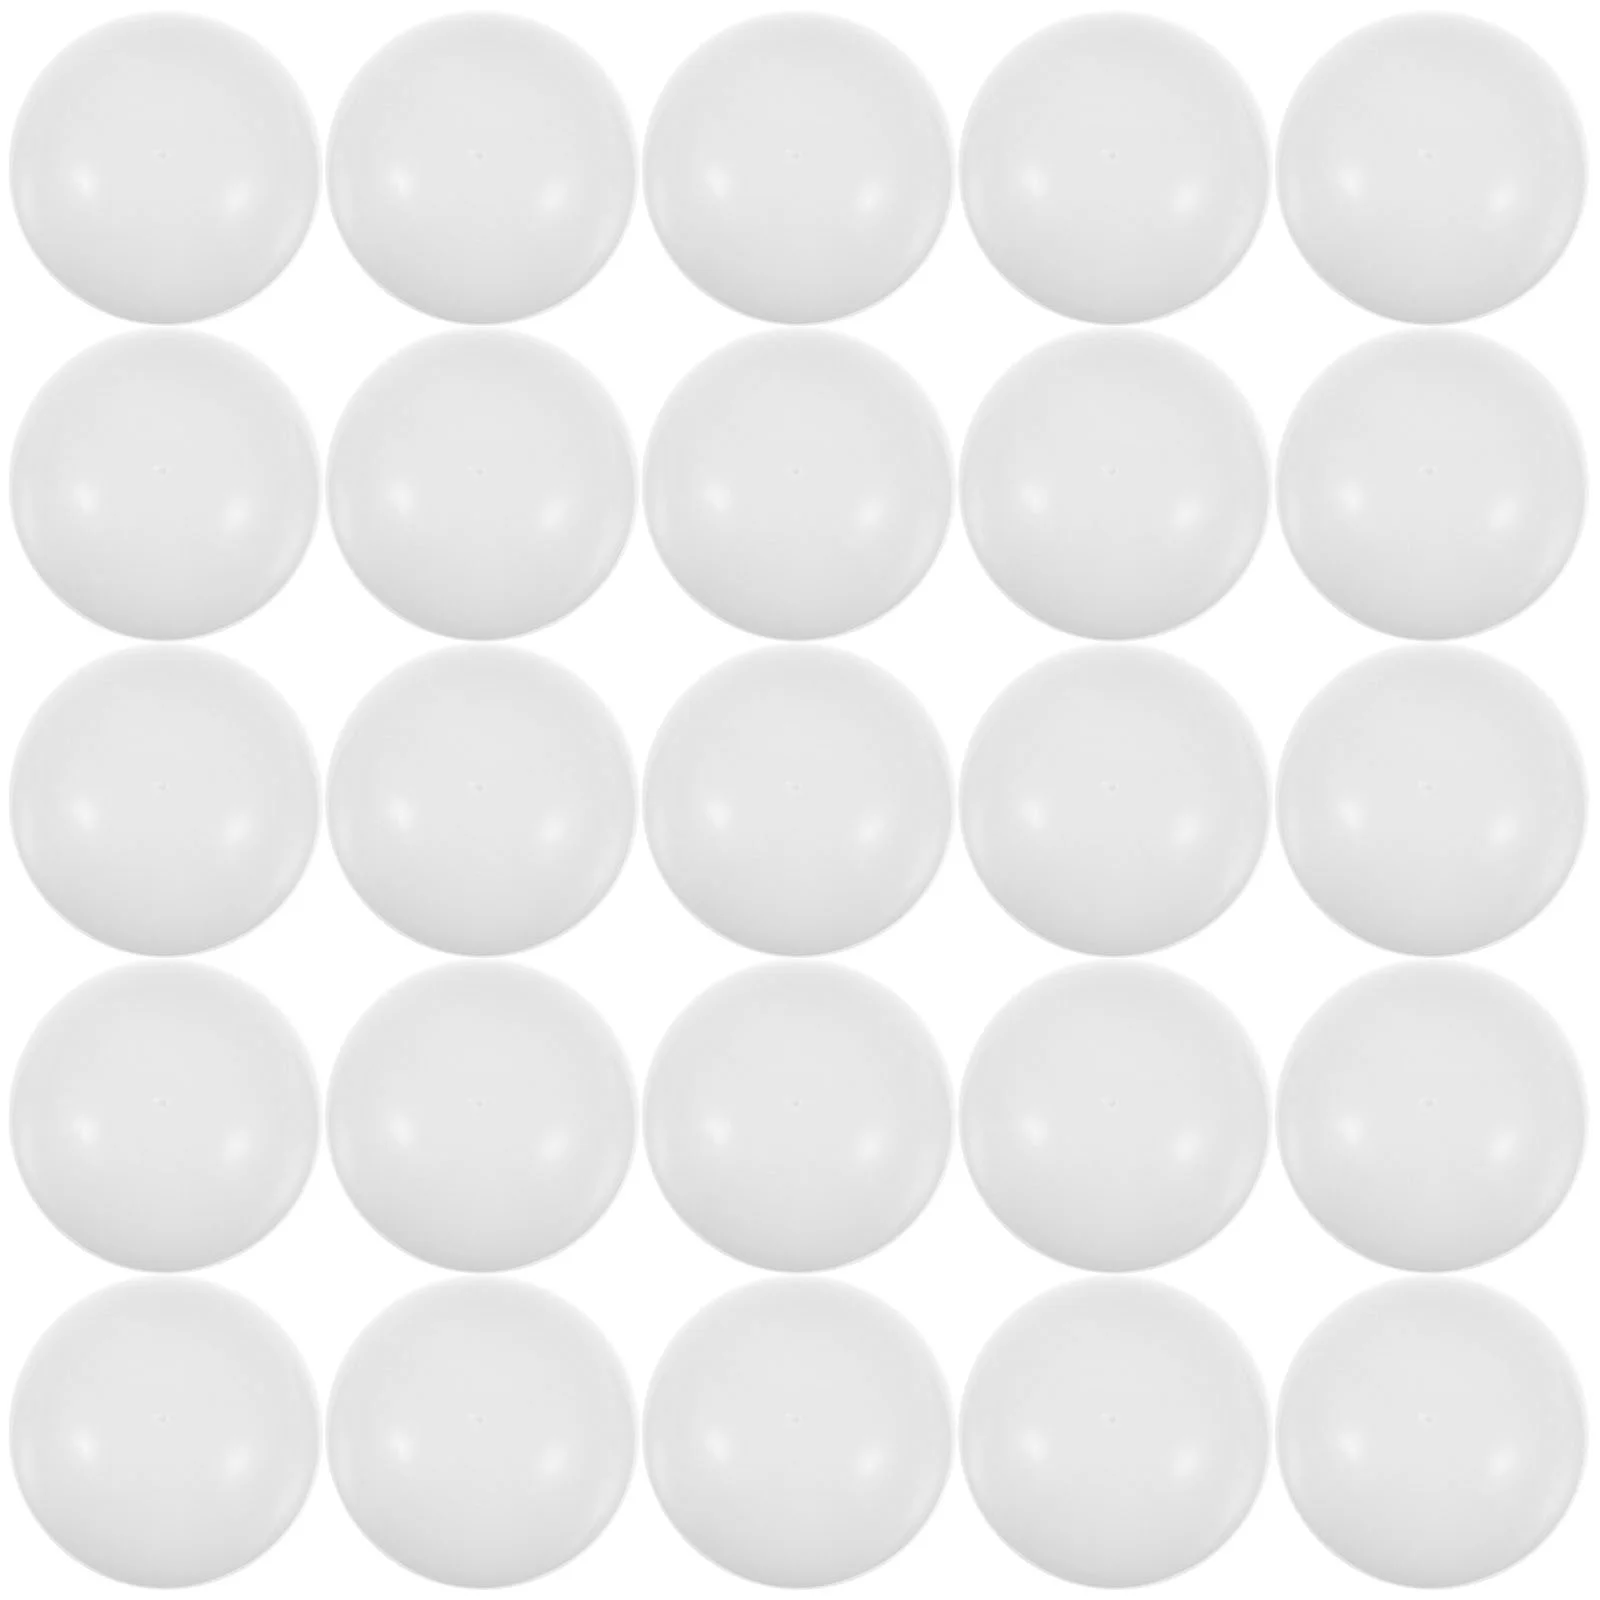 

25 Pcs Lottery Ball White Balls Picking Party Plastic Free Throw Sphere Pvc Activity Calling Entertainment Interesting Game